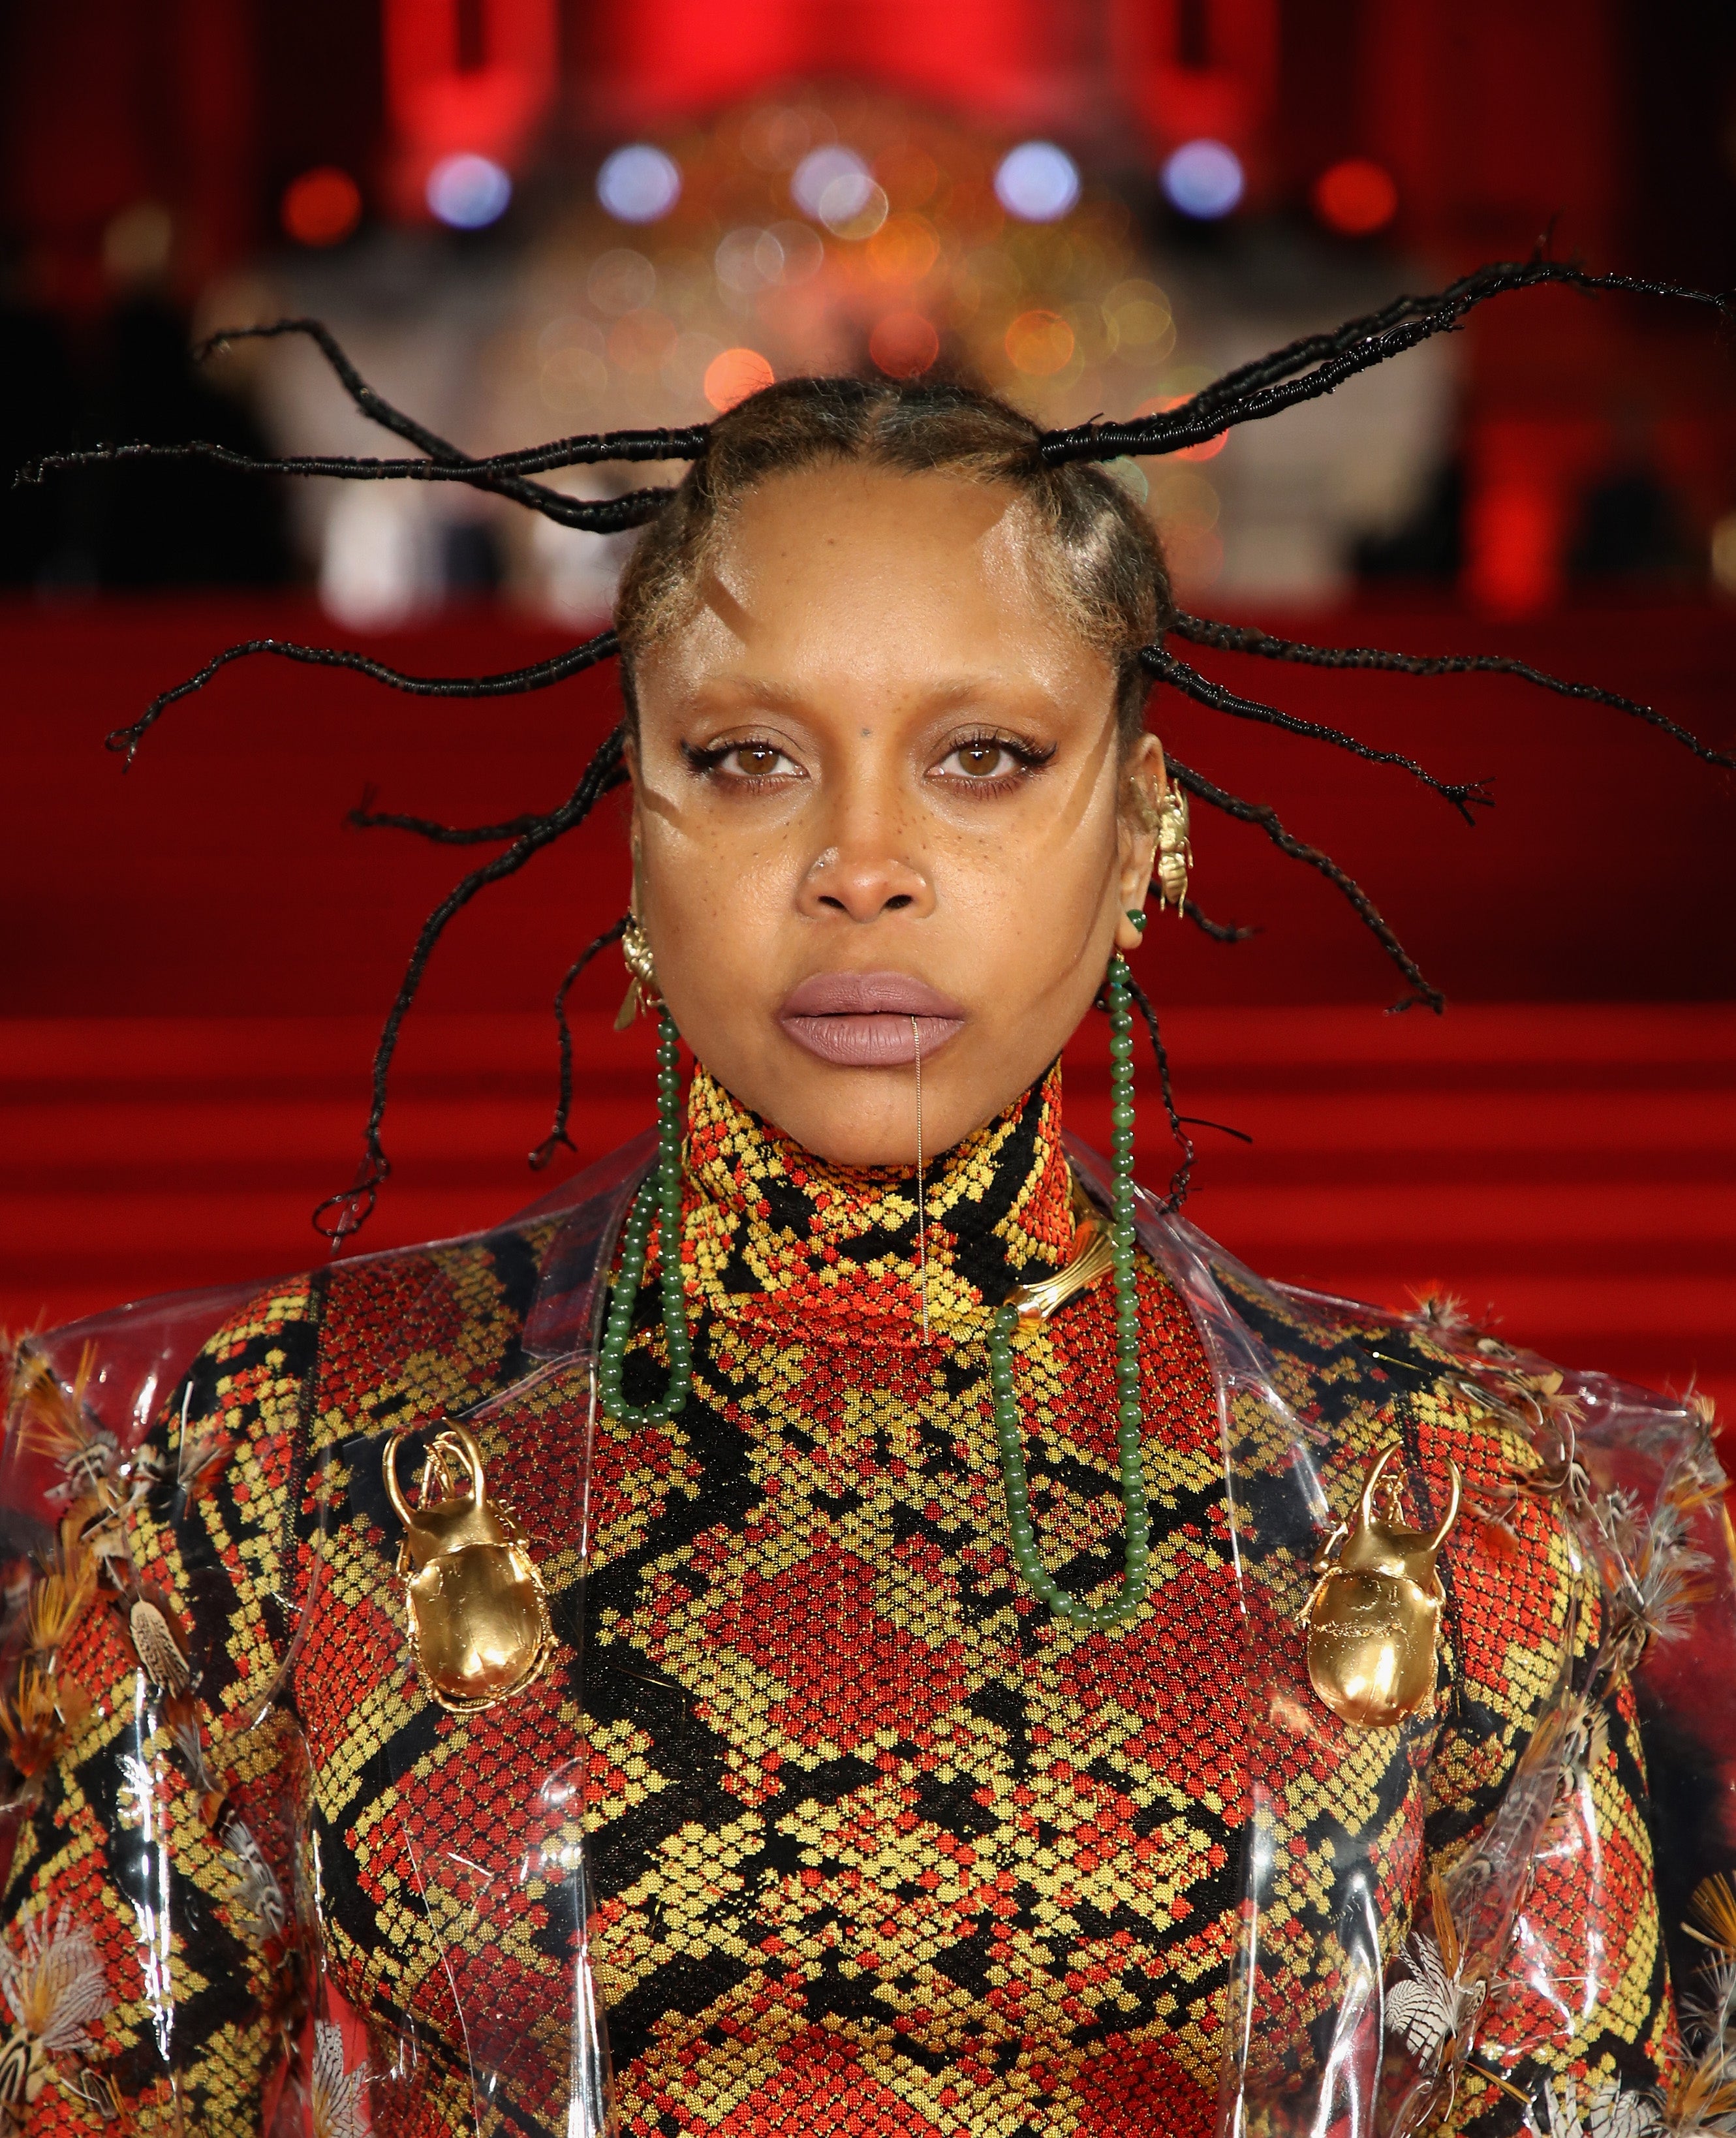 Erykah Badu Says Stories About A Stalker In Her Home Are "Overblown"
